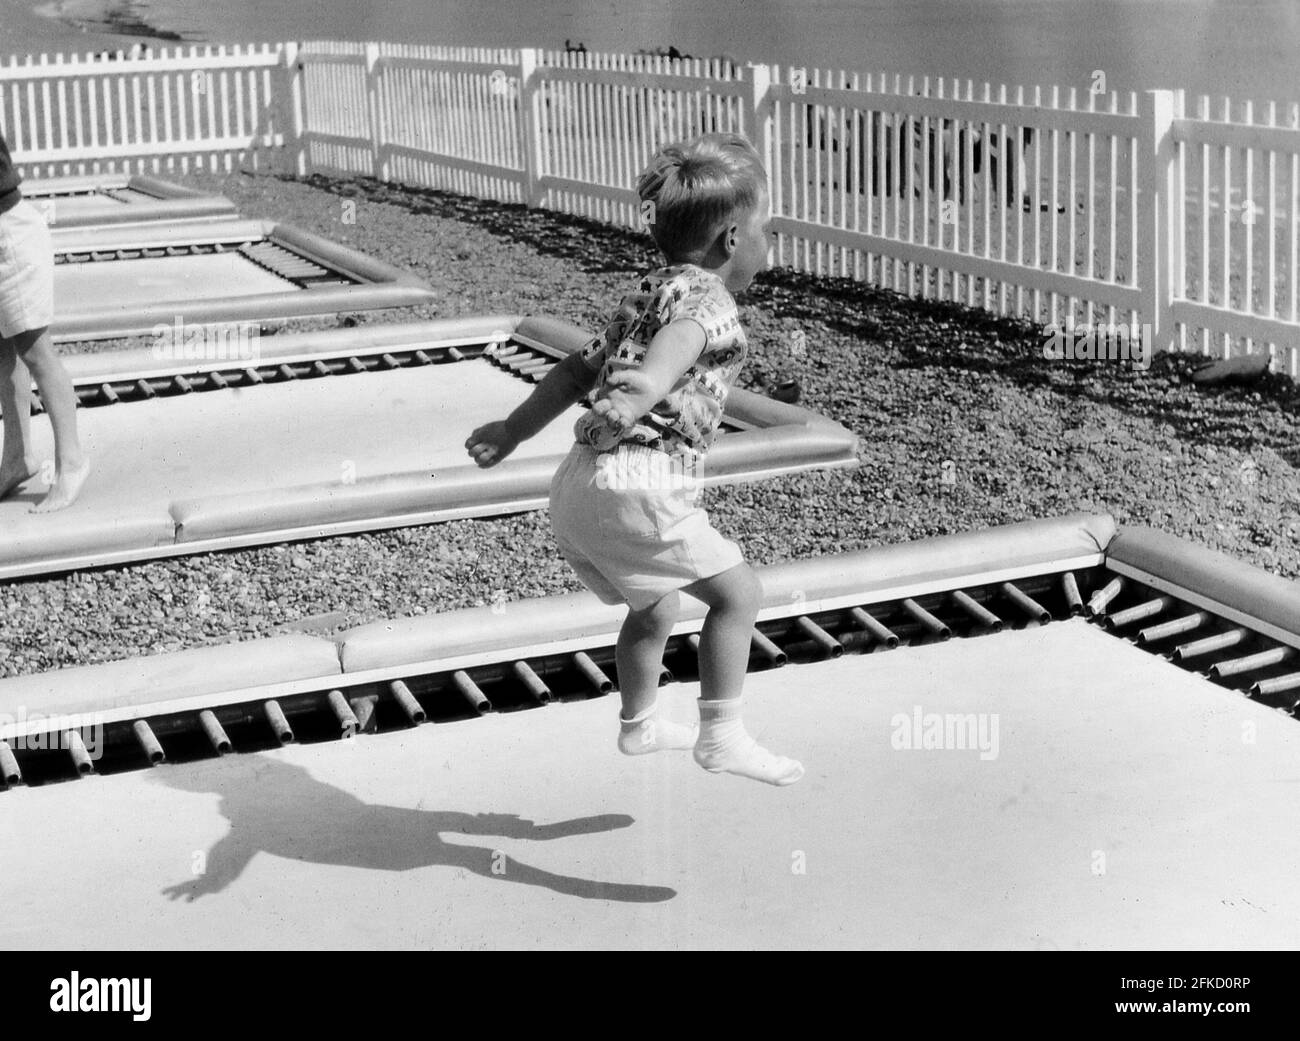 1966, historical, a little boy jumping or bouncing on a trampoline, one of several, in an enclosed, fenced area on a pebbly beach beside the sea. There are many health benefits with using trampolines and bouncing on them is also great fun. Stock Photo